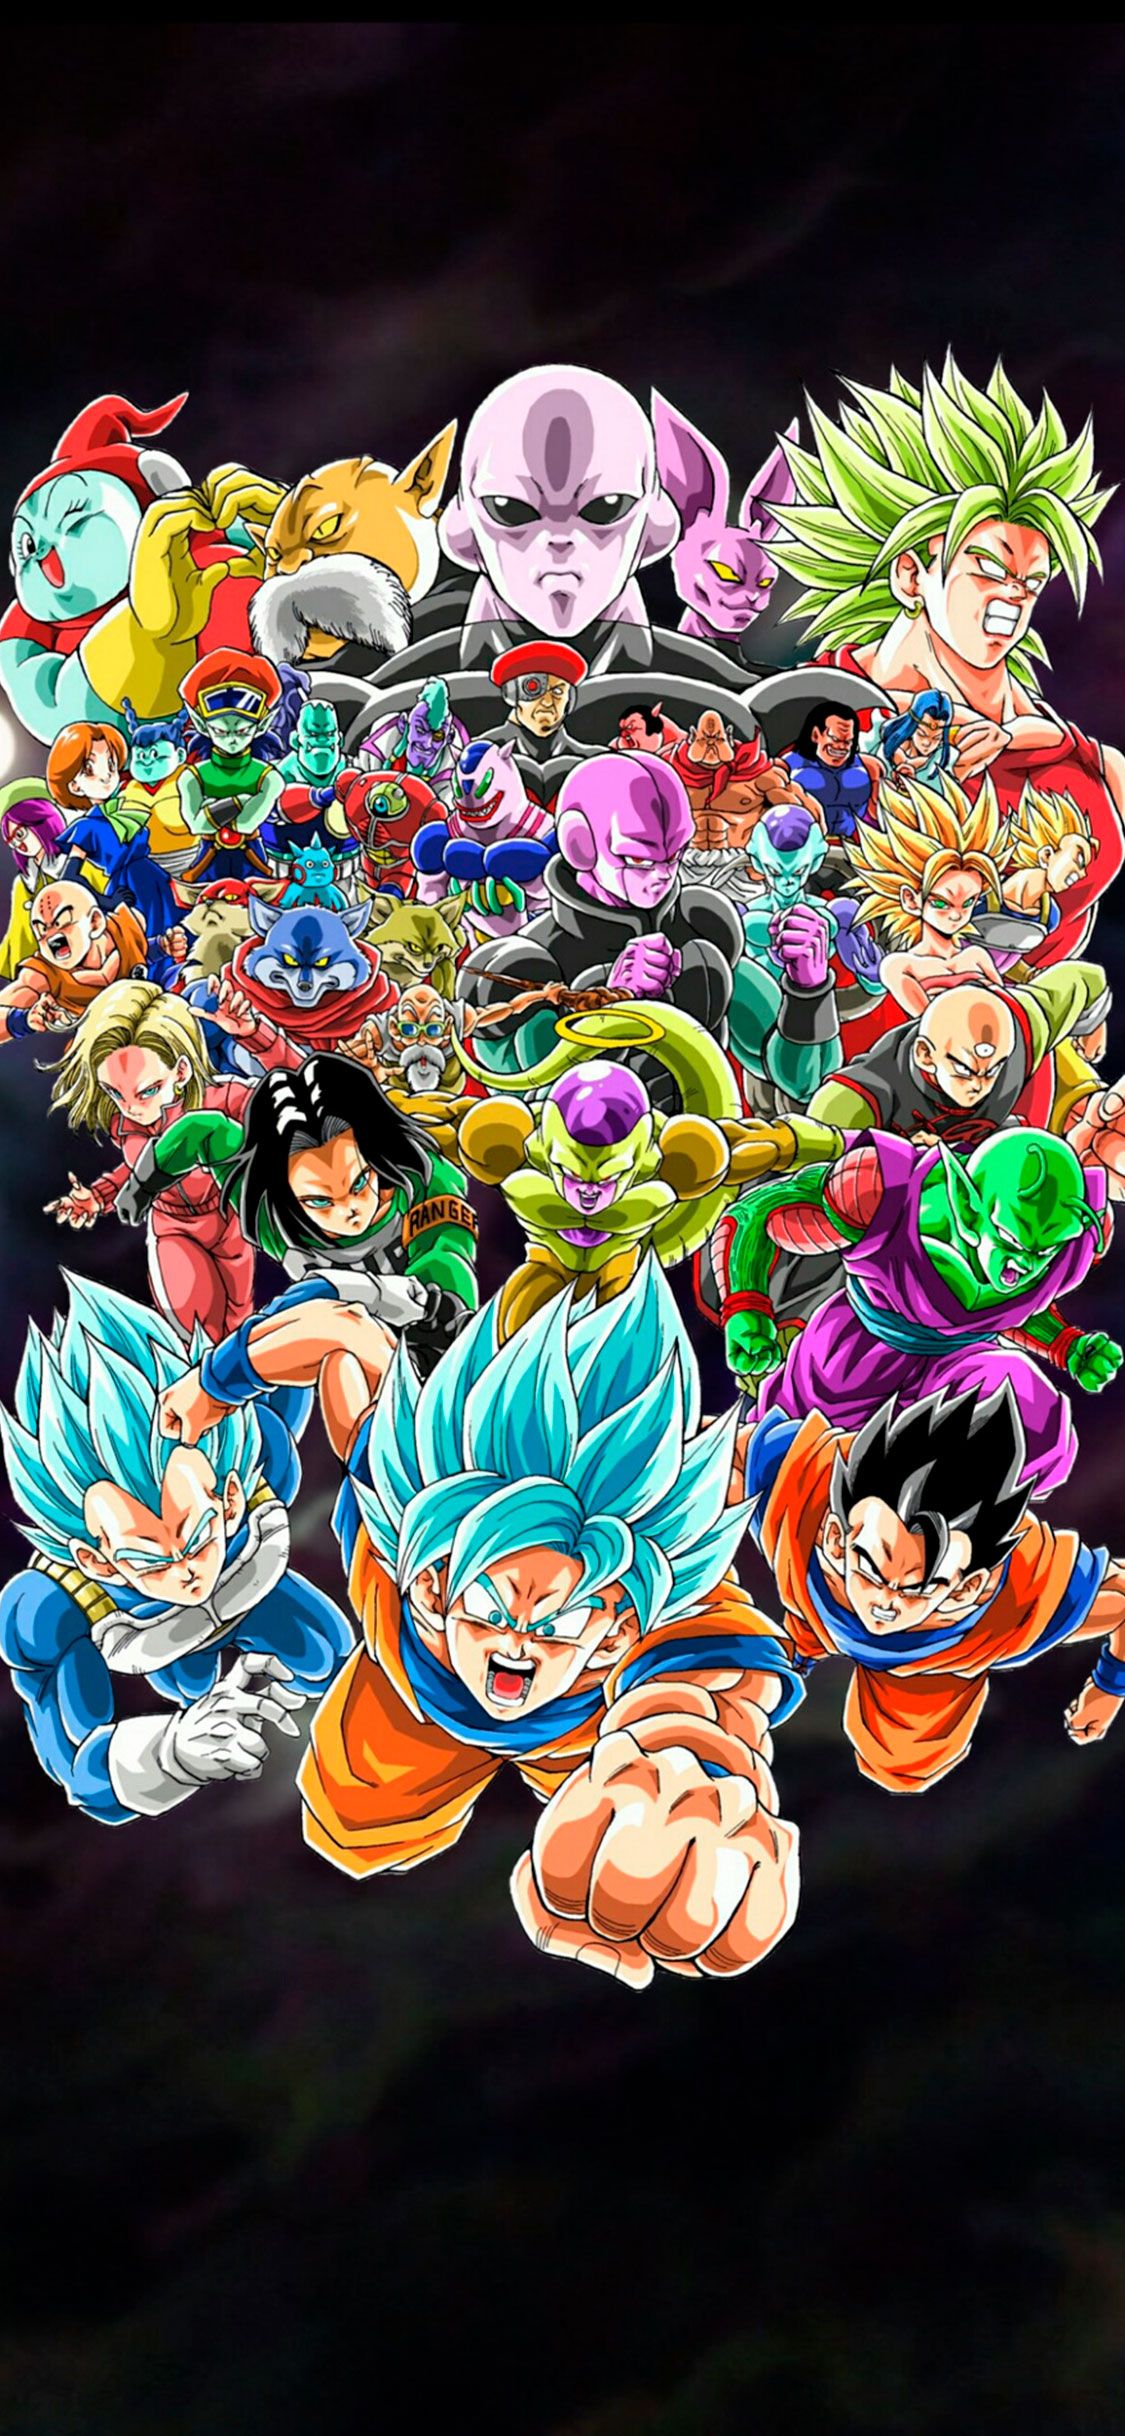 Dragon Ball Wallpaper for iPhone X, 6